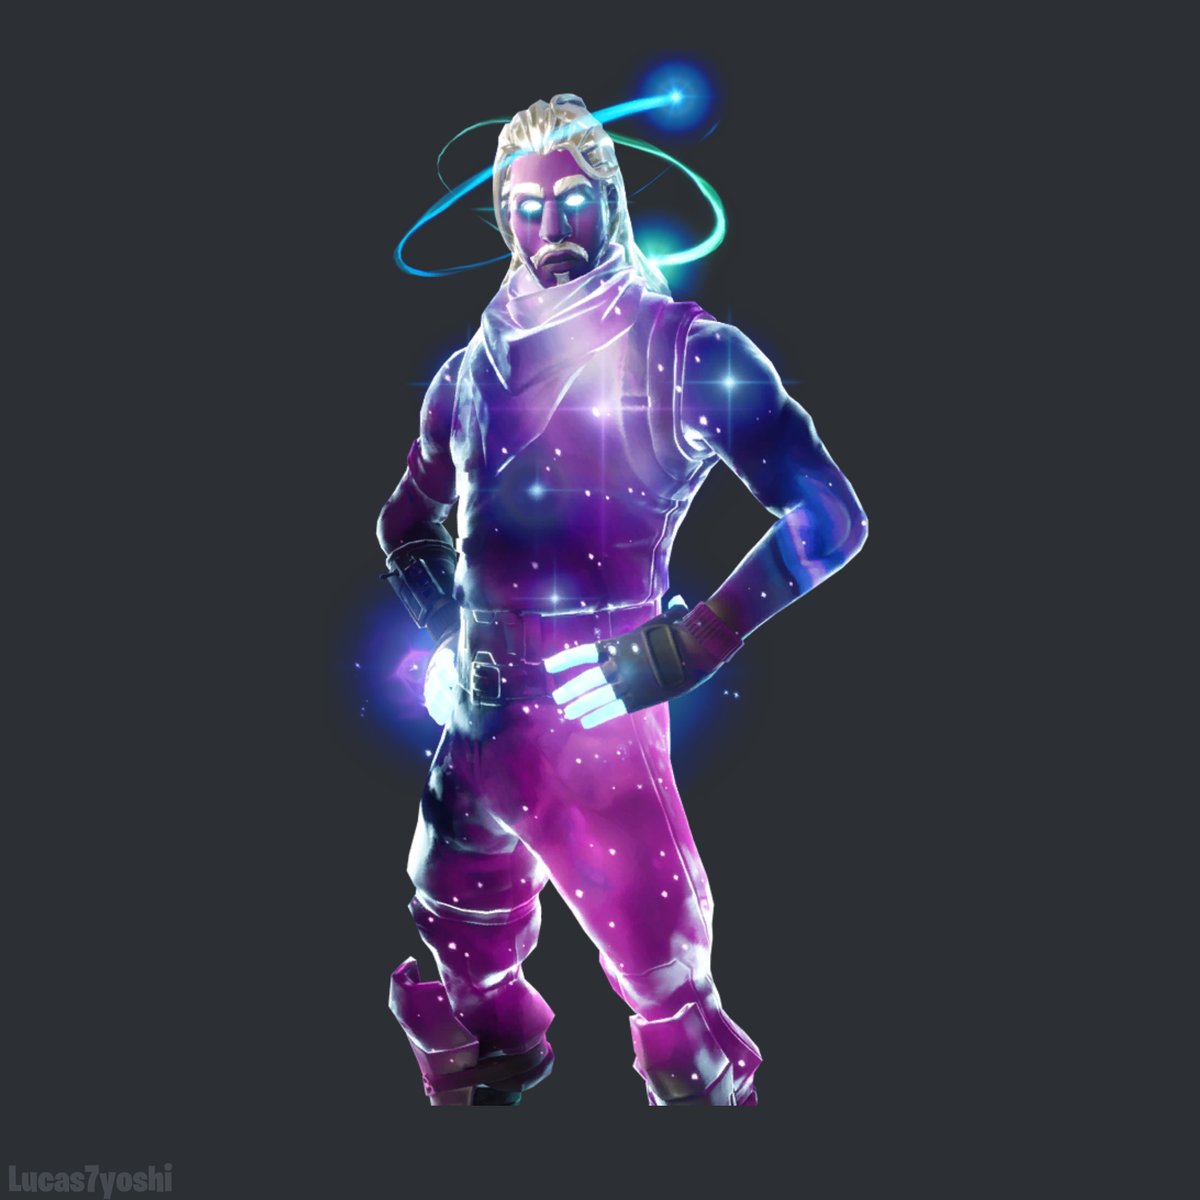 Fortnite Leaked Skins And Cosmetics In Update Found By Dataminers